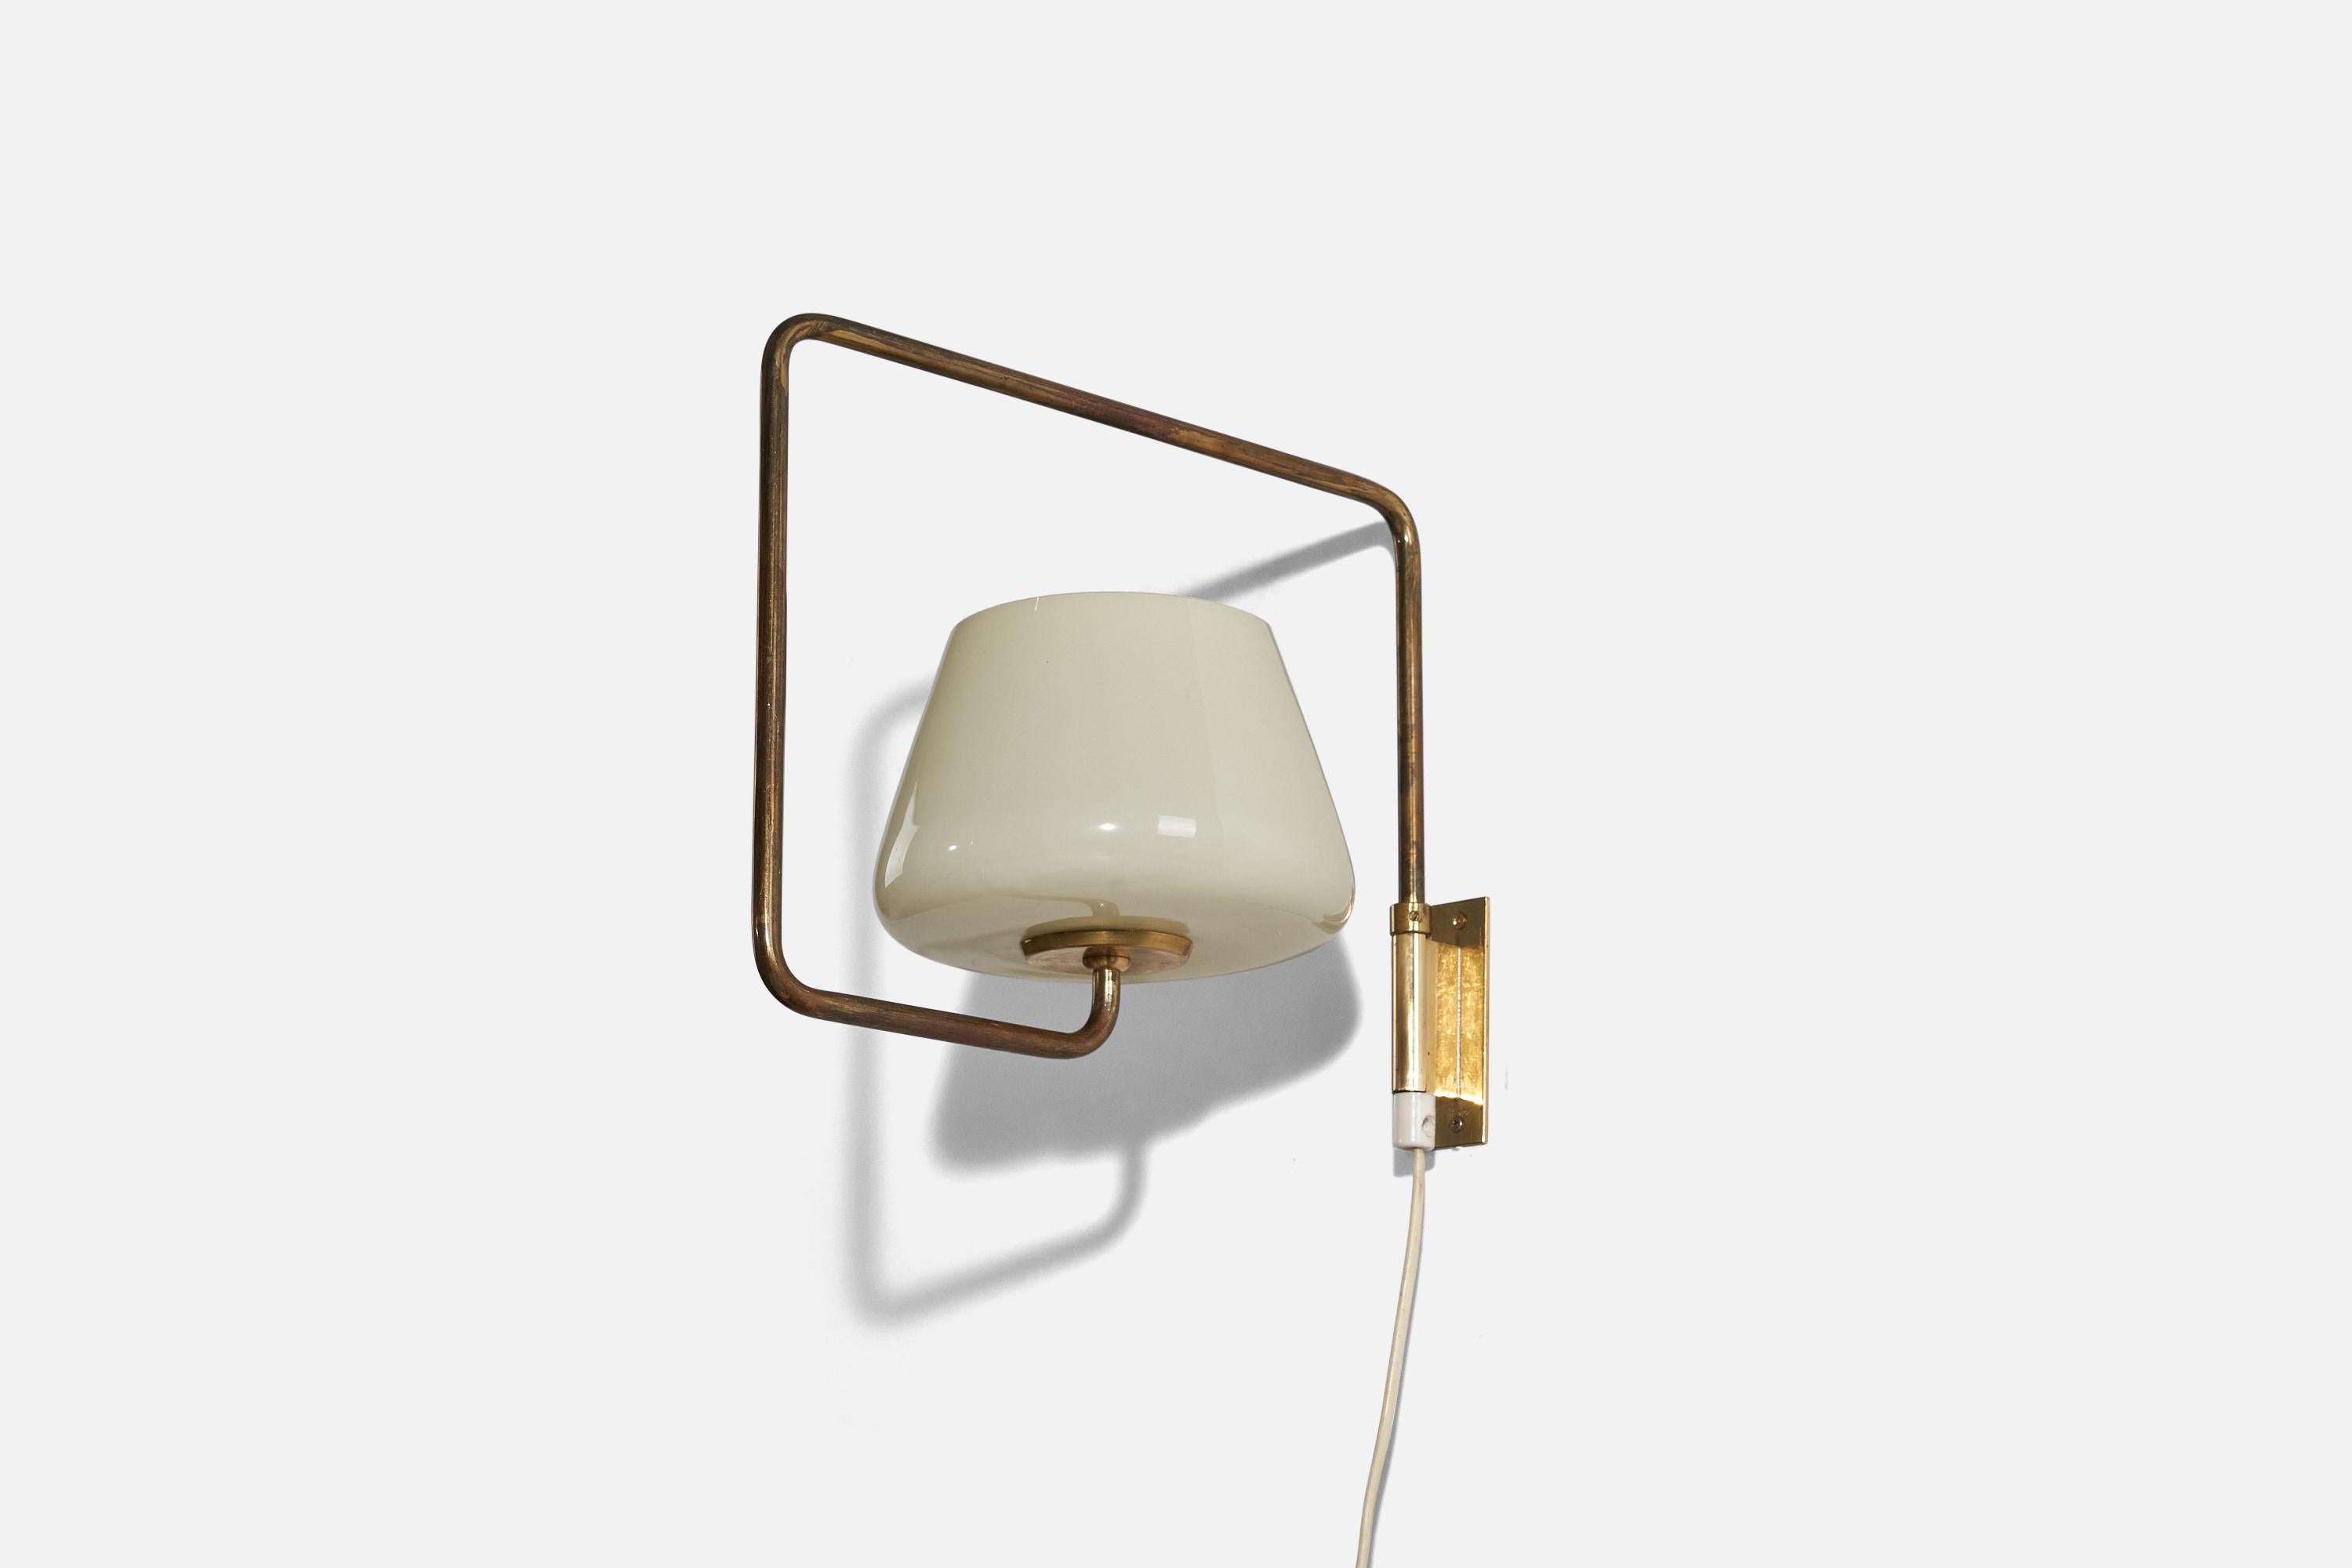 A glass and brass wall light designed by Maria Lindeman and produced by Idman, Finland, 1950s.

Dimensions of back plate (inches) : 3.62 x 1.18 x 0.06 (H x W x D).